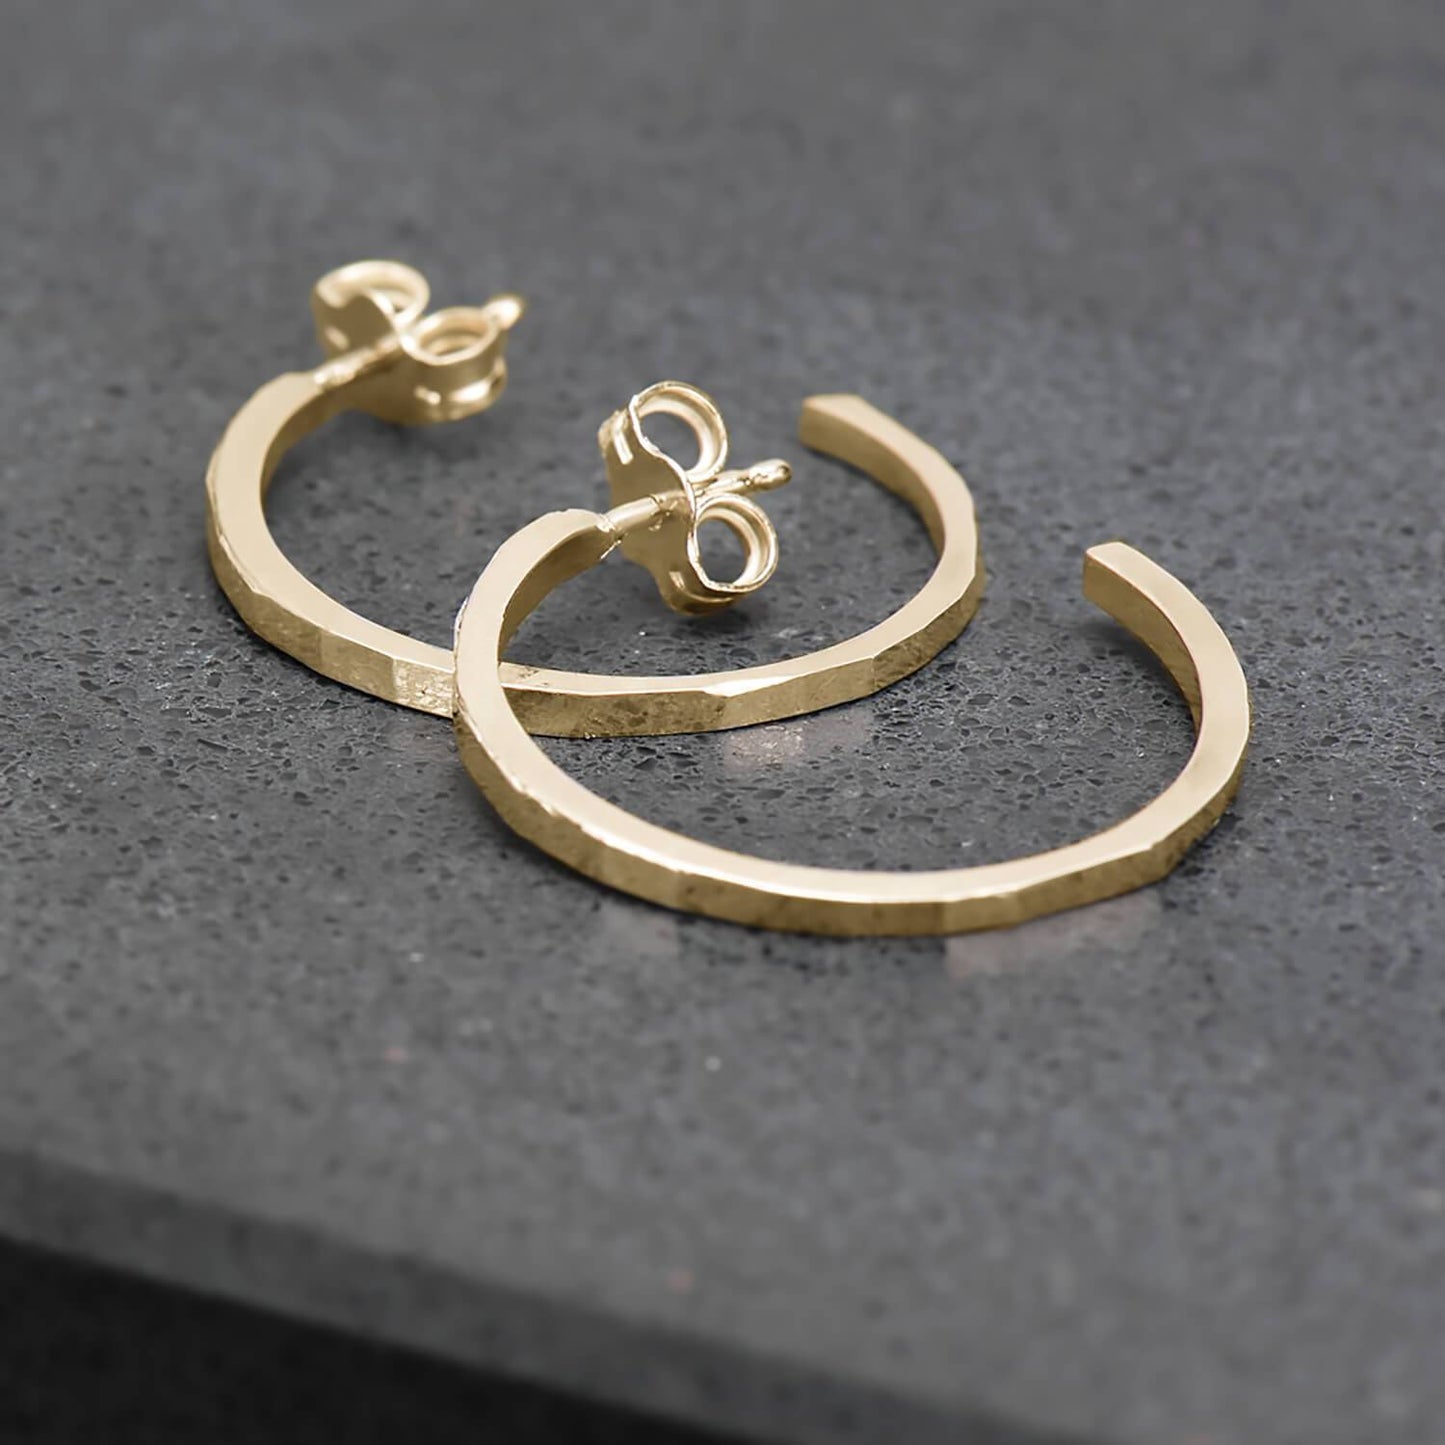 Thin, hammer finished hoop earrings in 10 karat recycled yellow gold.